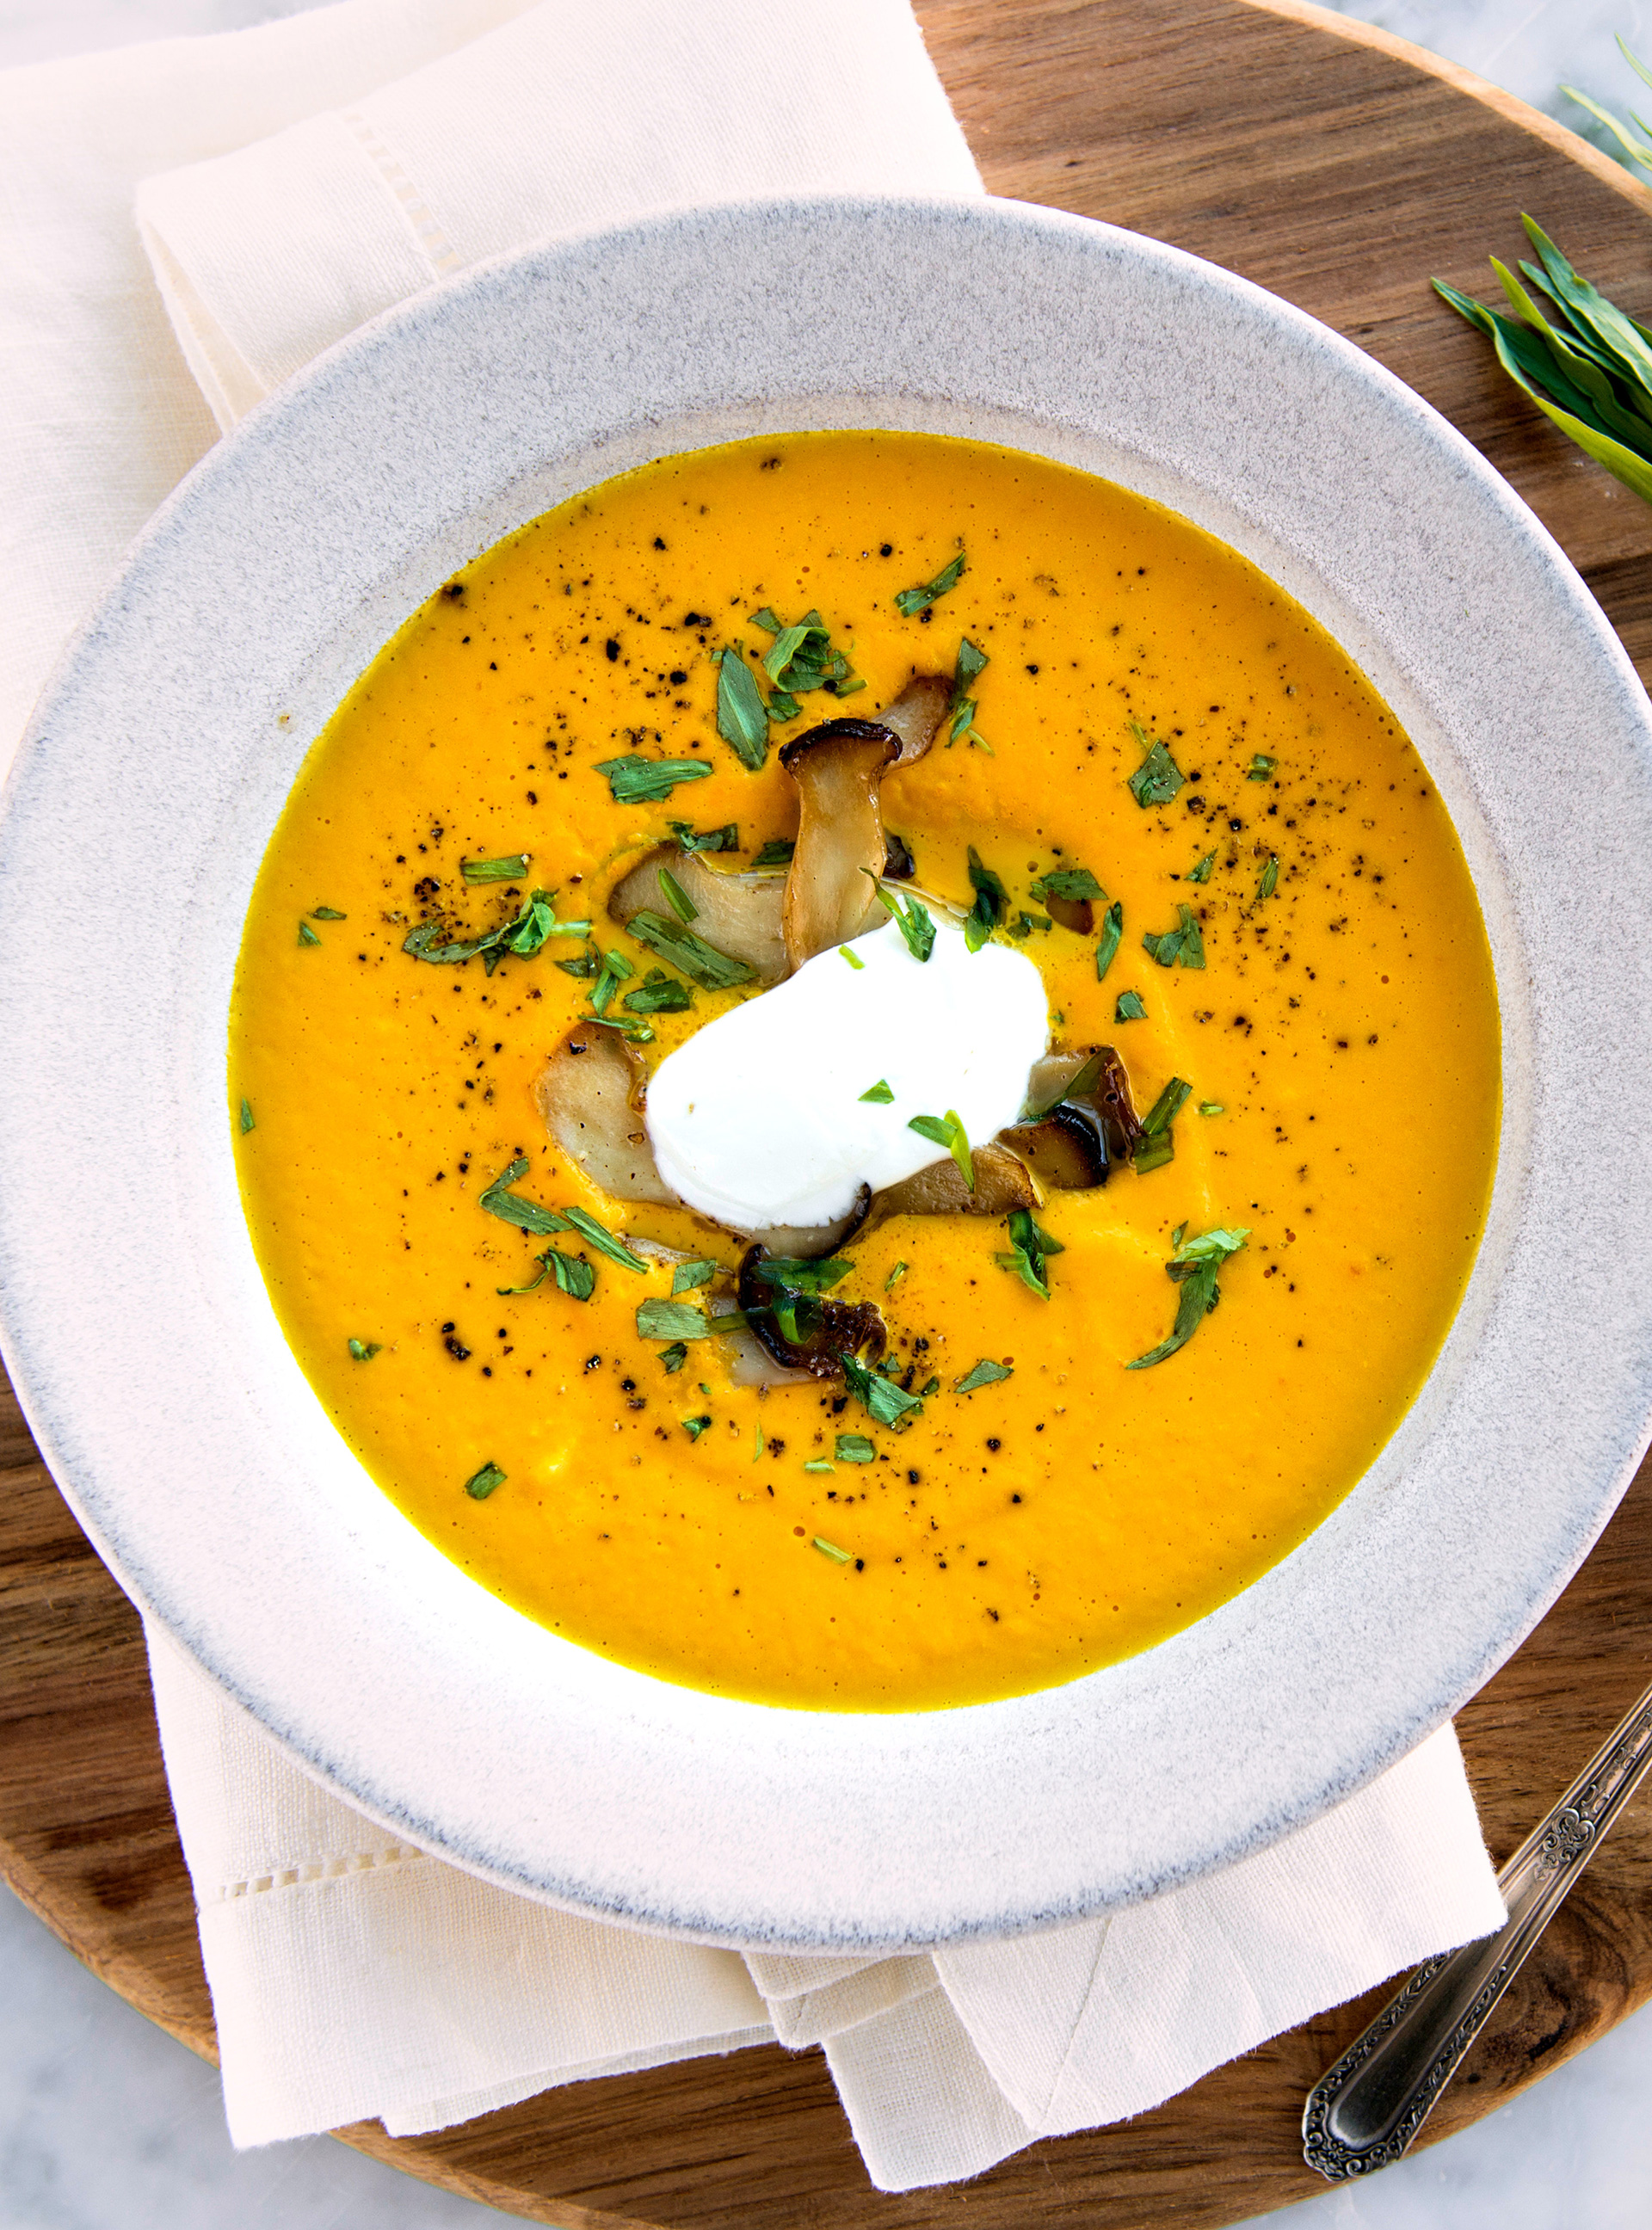 Cream of Carrot Soup with Oyster Mushrooms and Tarragon